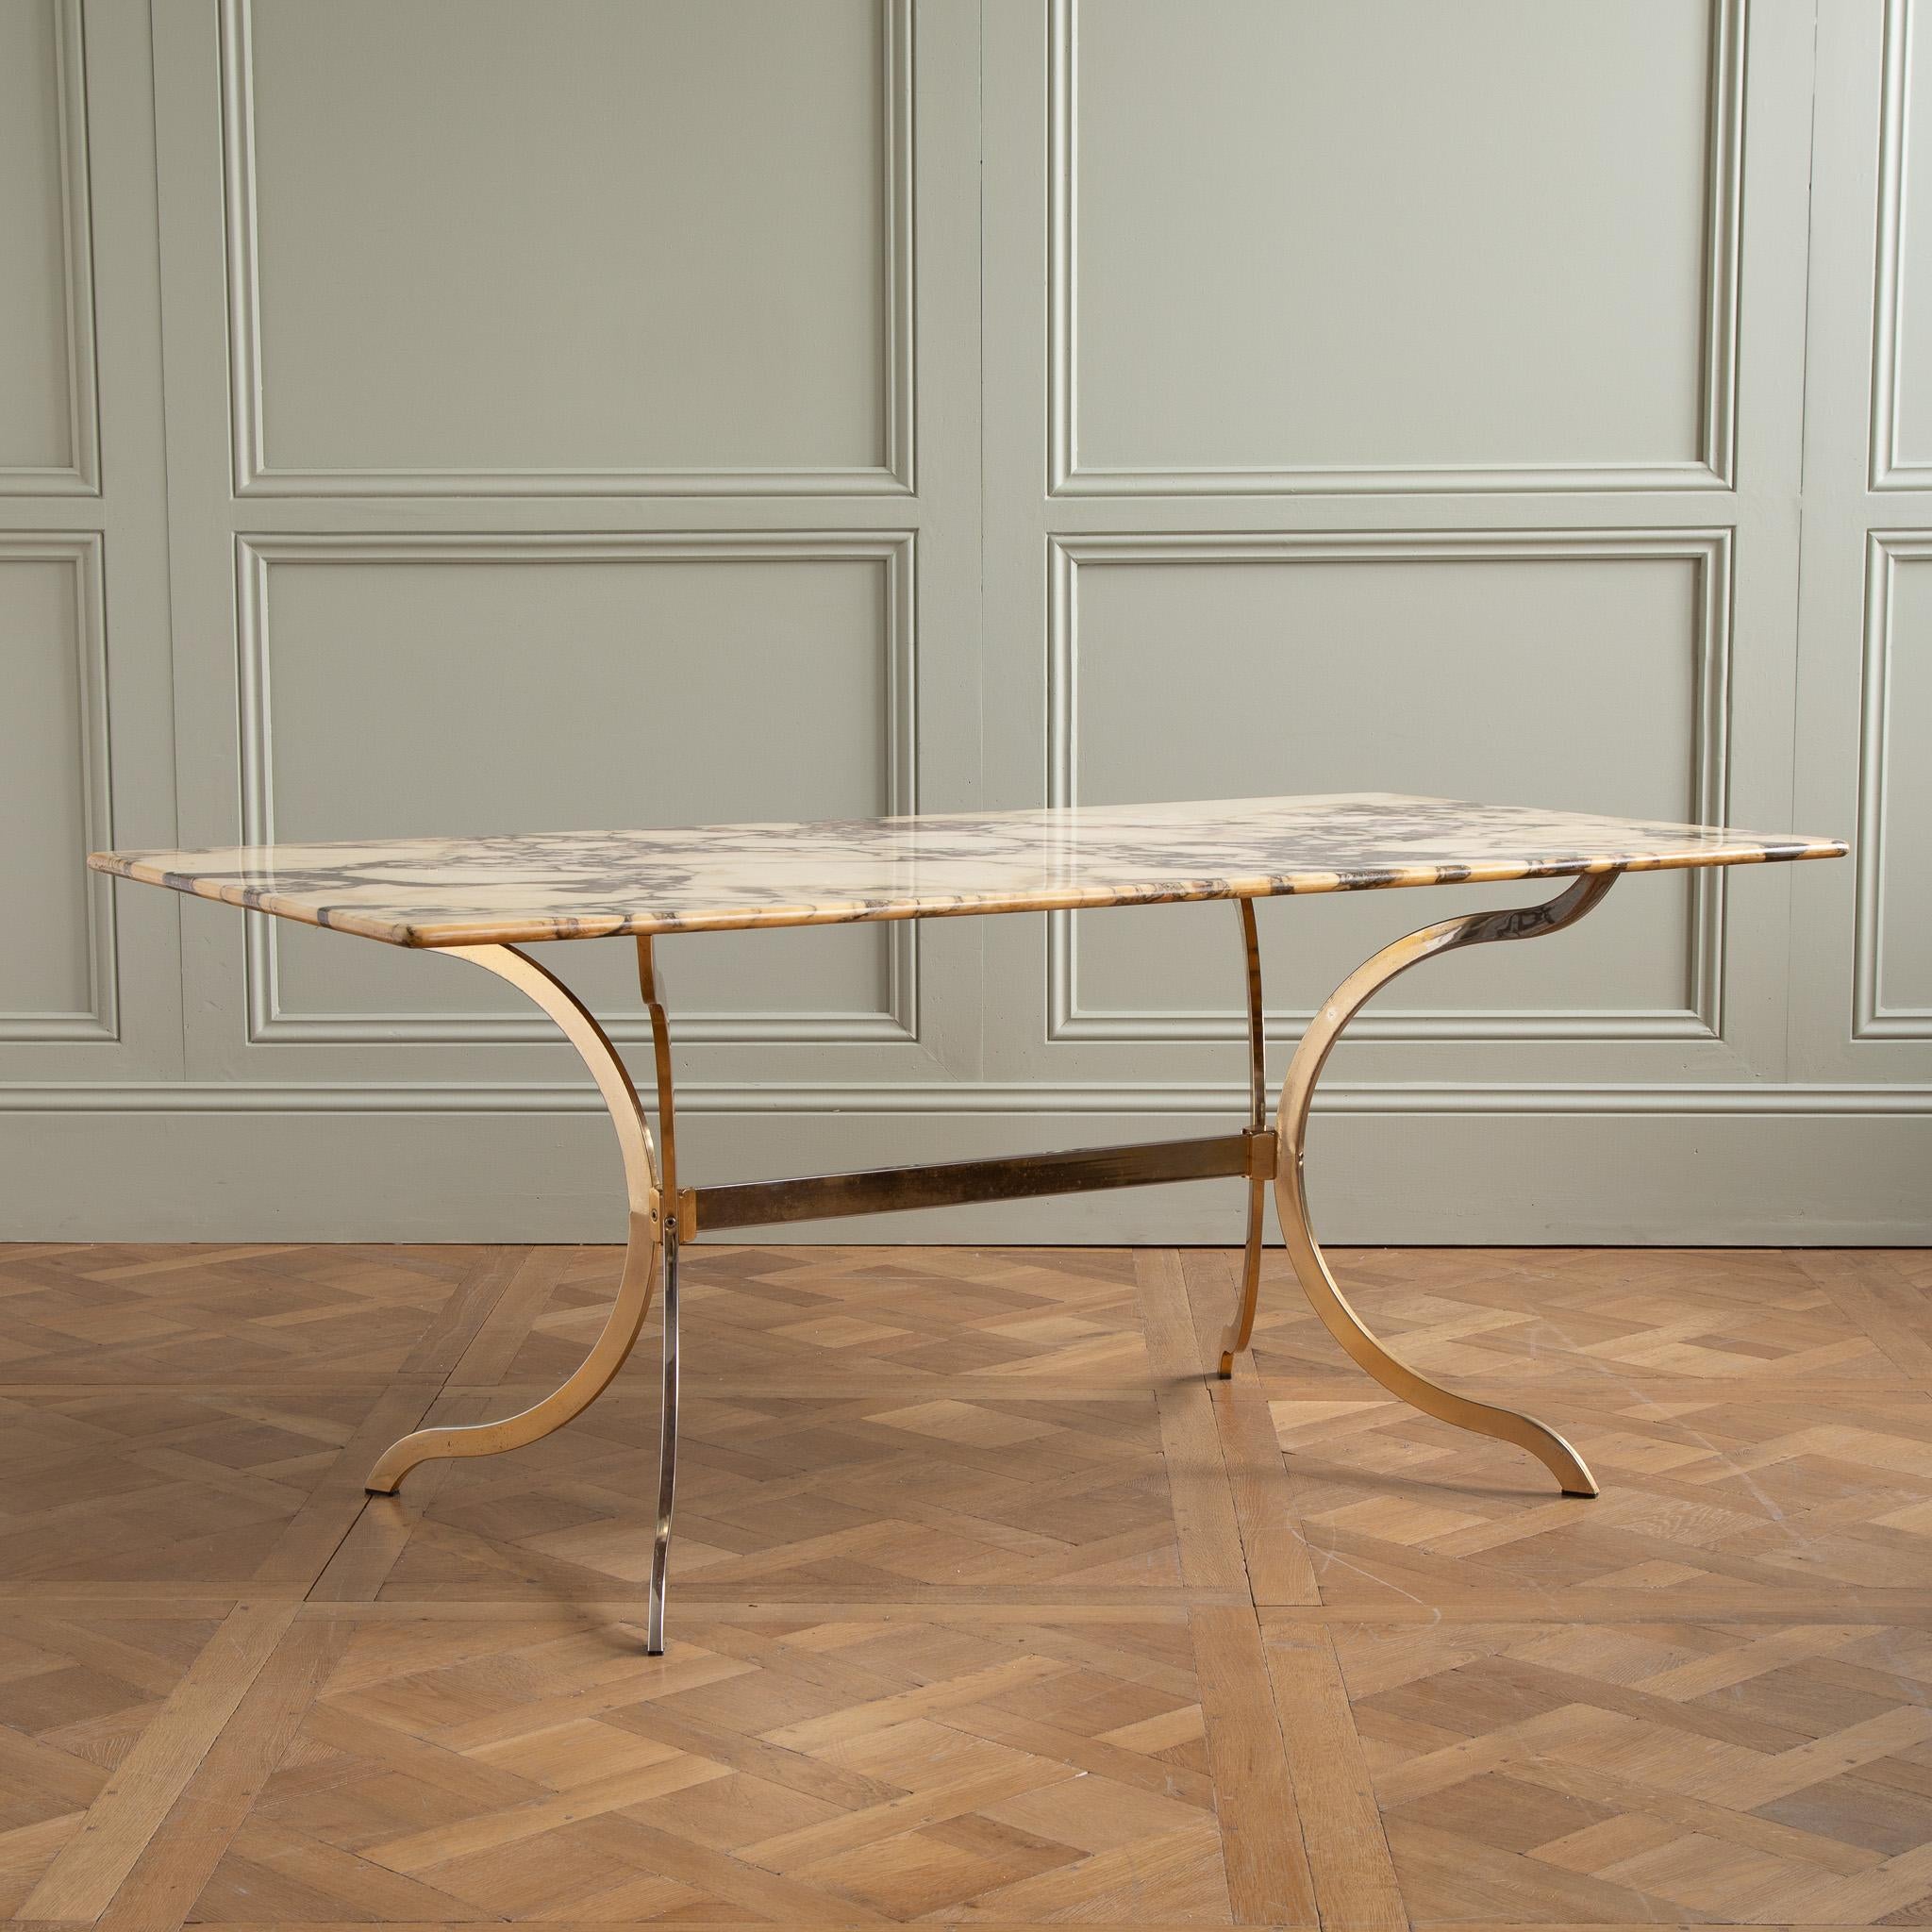 Plated 1960's designer Brass table with Breche violette marble 